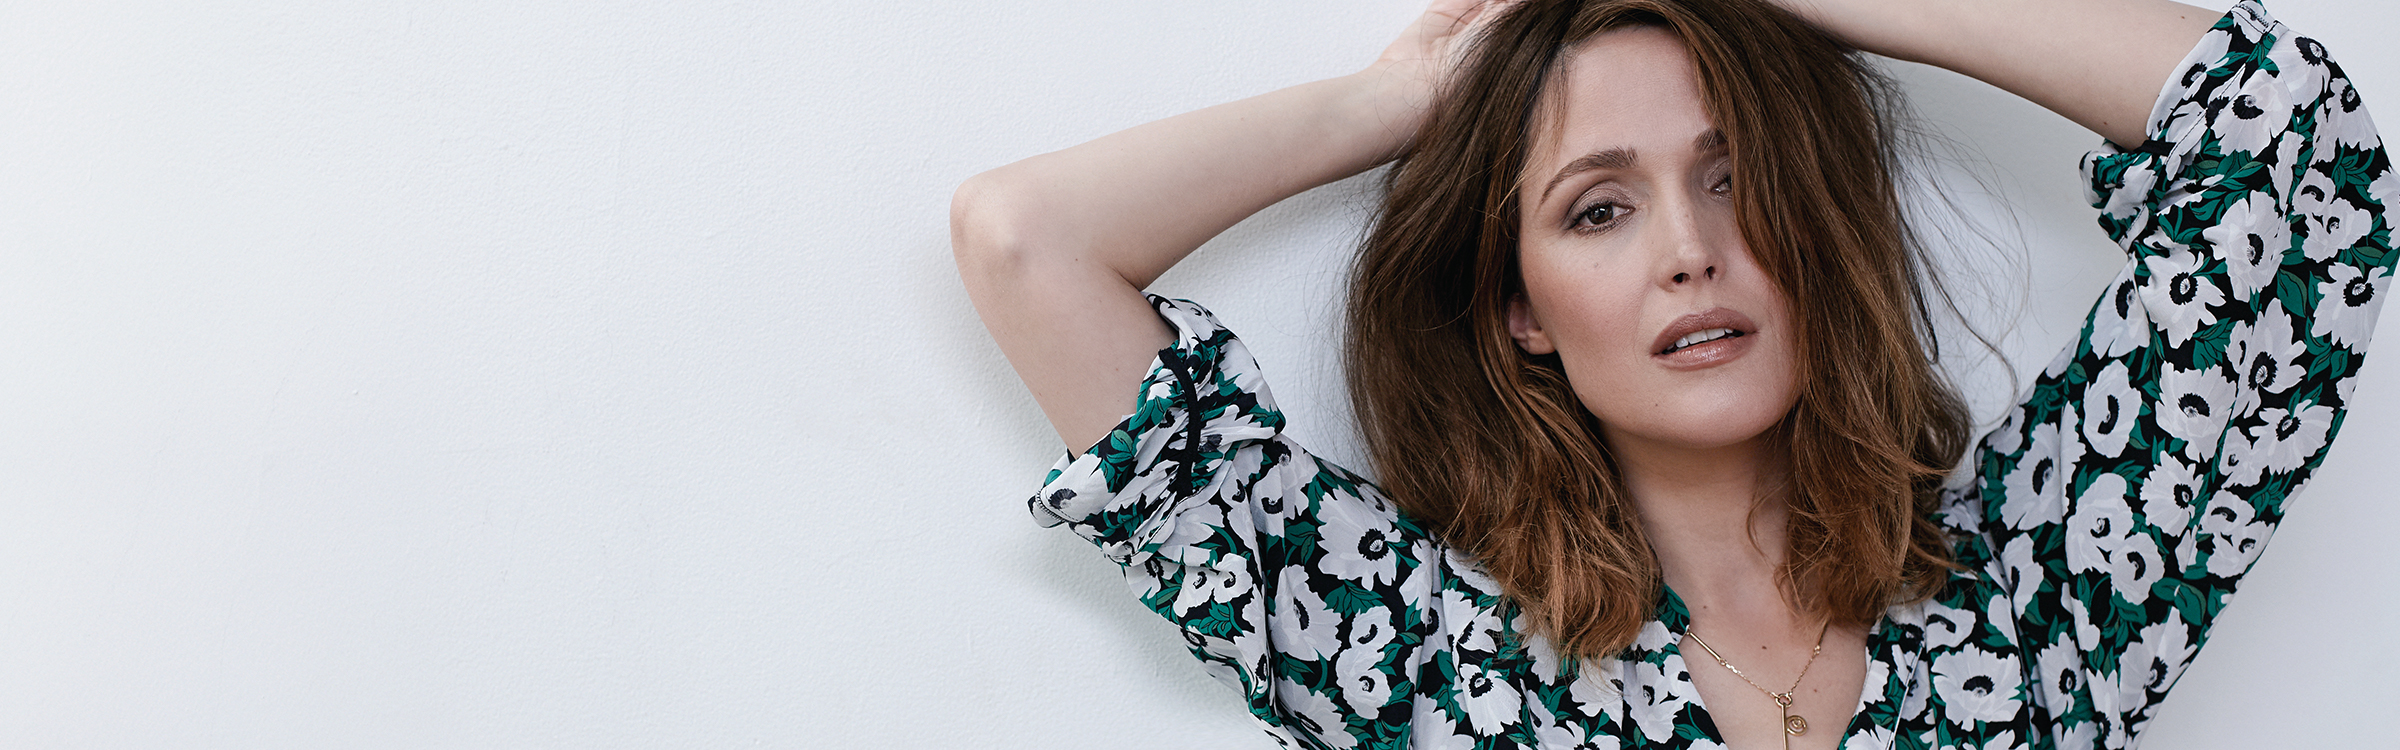 Rose Byrne on Bidets, Her 40s, and Stepping Into Her Most Intimidating Role Yet